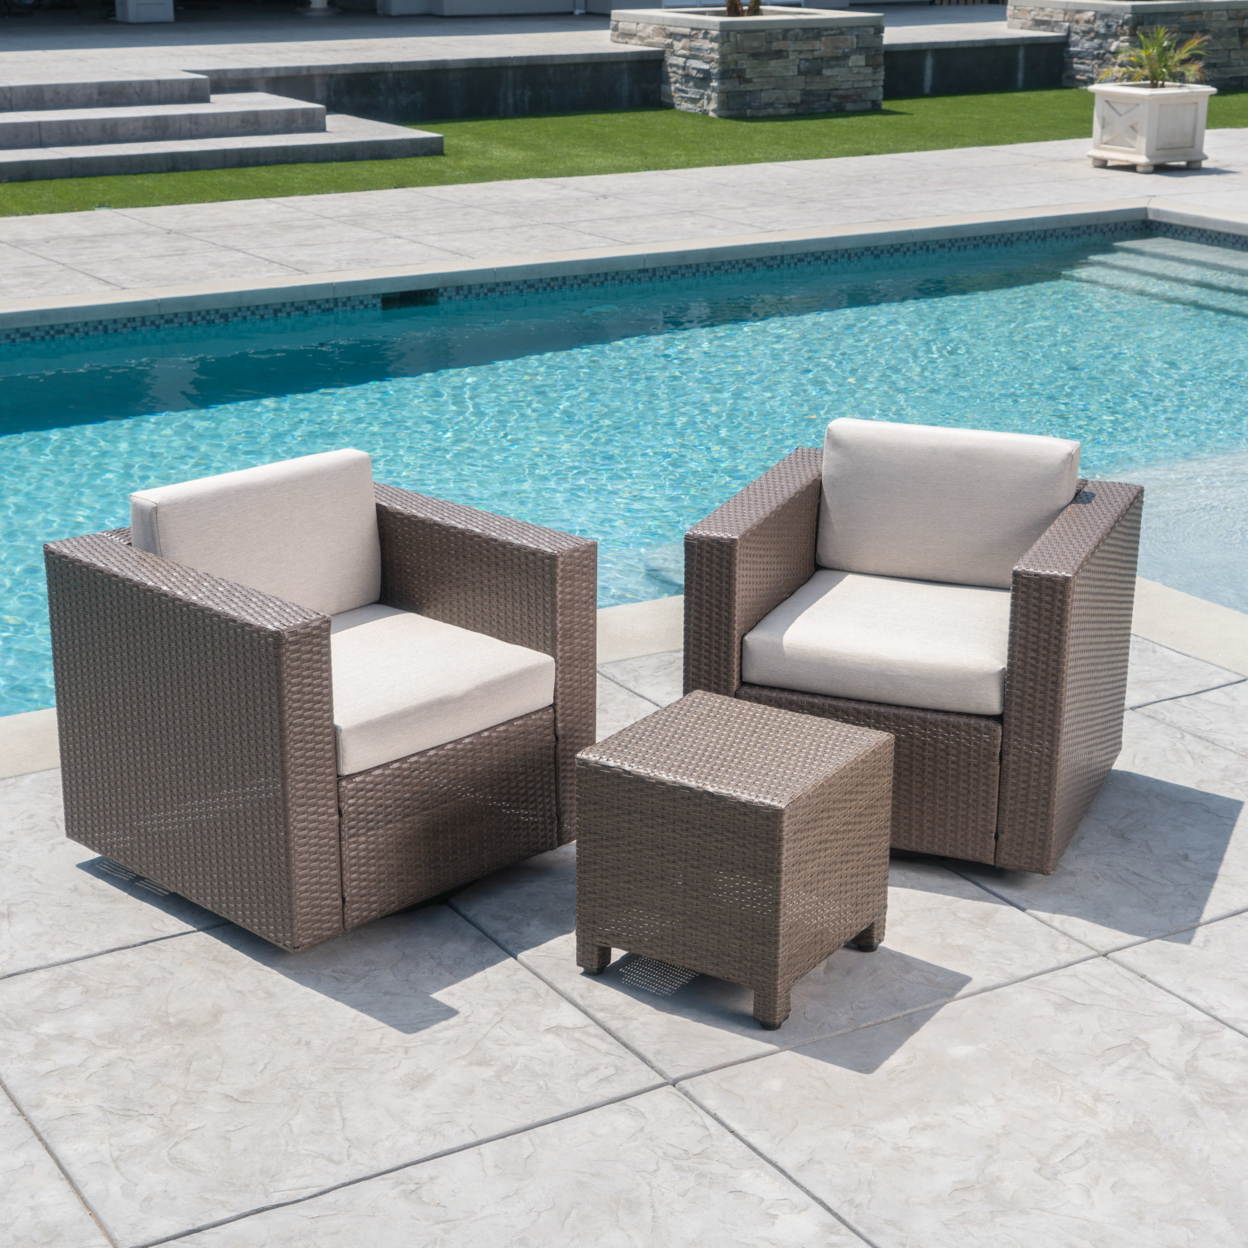 Venice Outdoor Wicker 3 Piece Swivel Chat Set With Water Resistant Cushions - Mix Black/Dark Gray